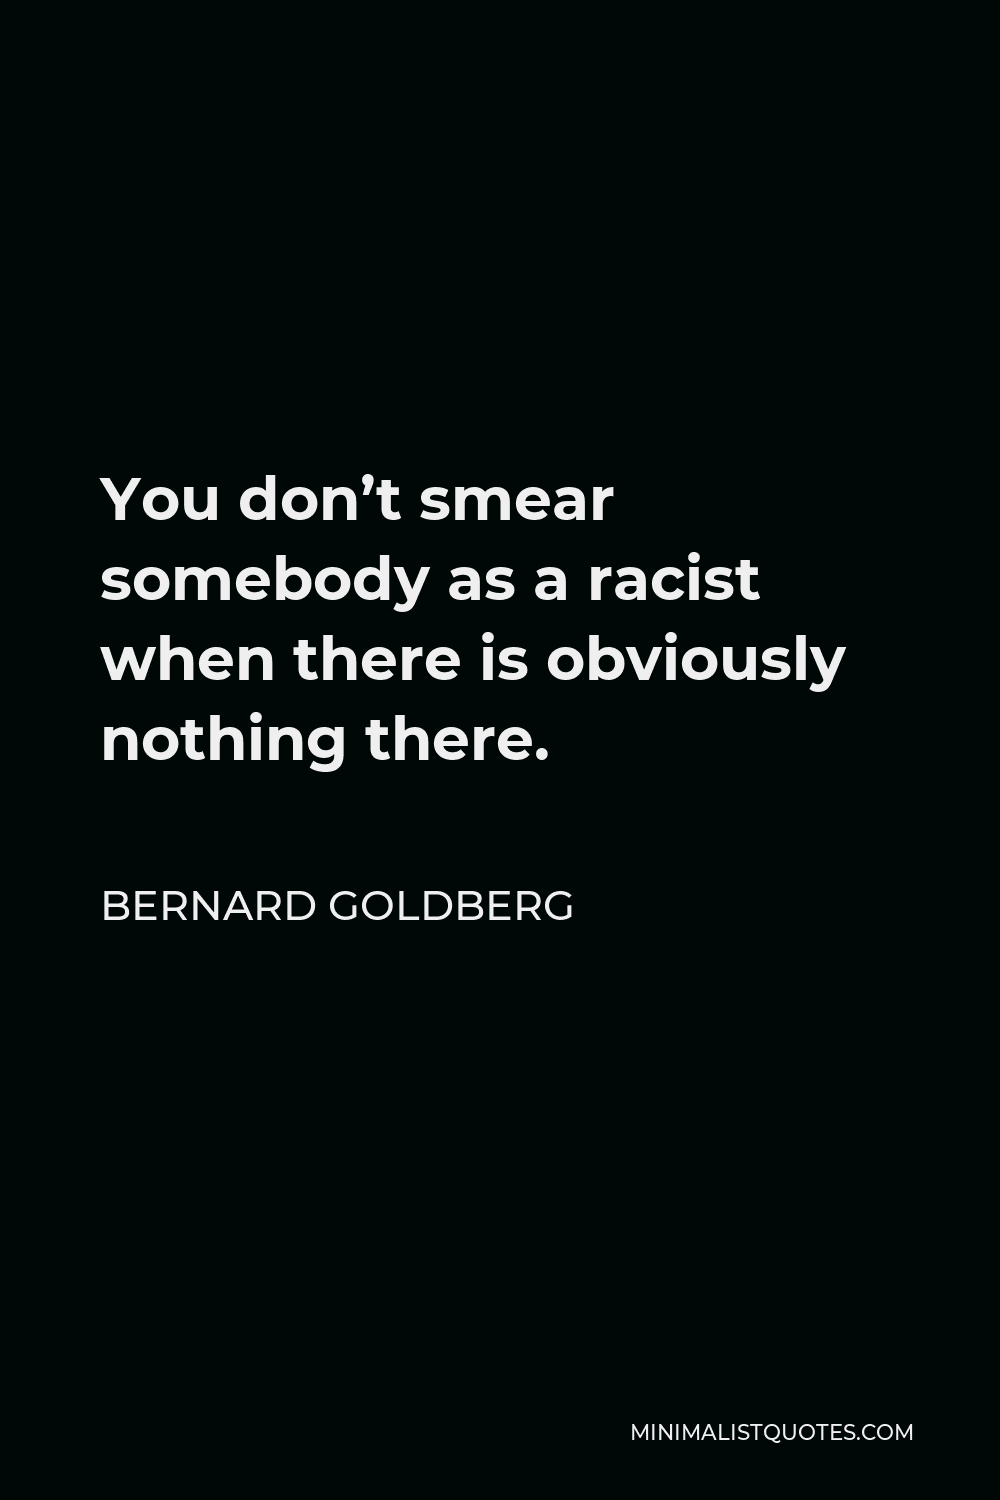 Bernard Goldberg Quote - You don’t smear somebody as a racist when there is obviously nothing there.